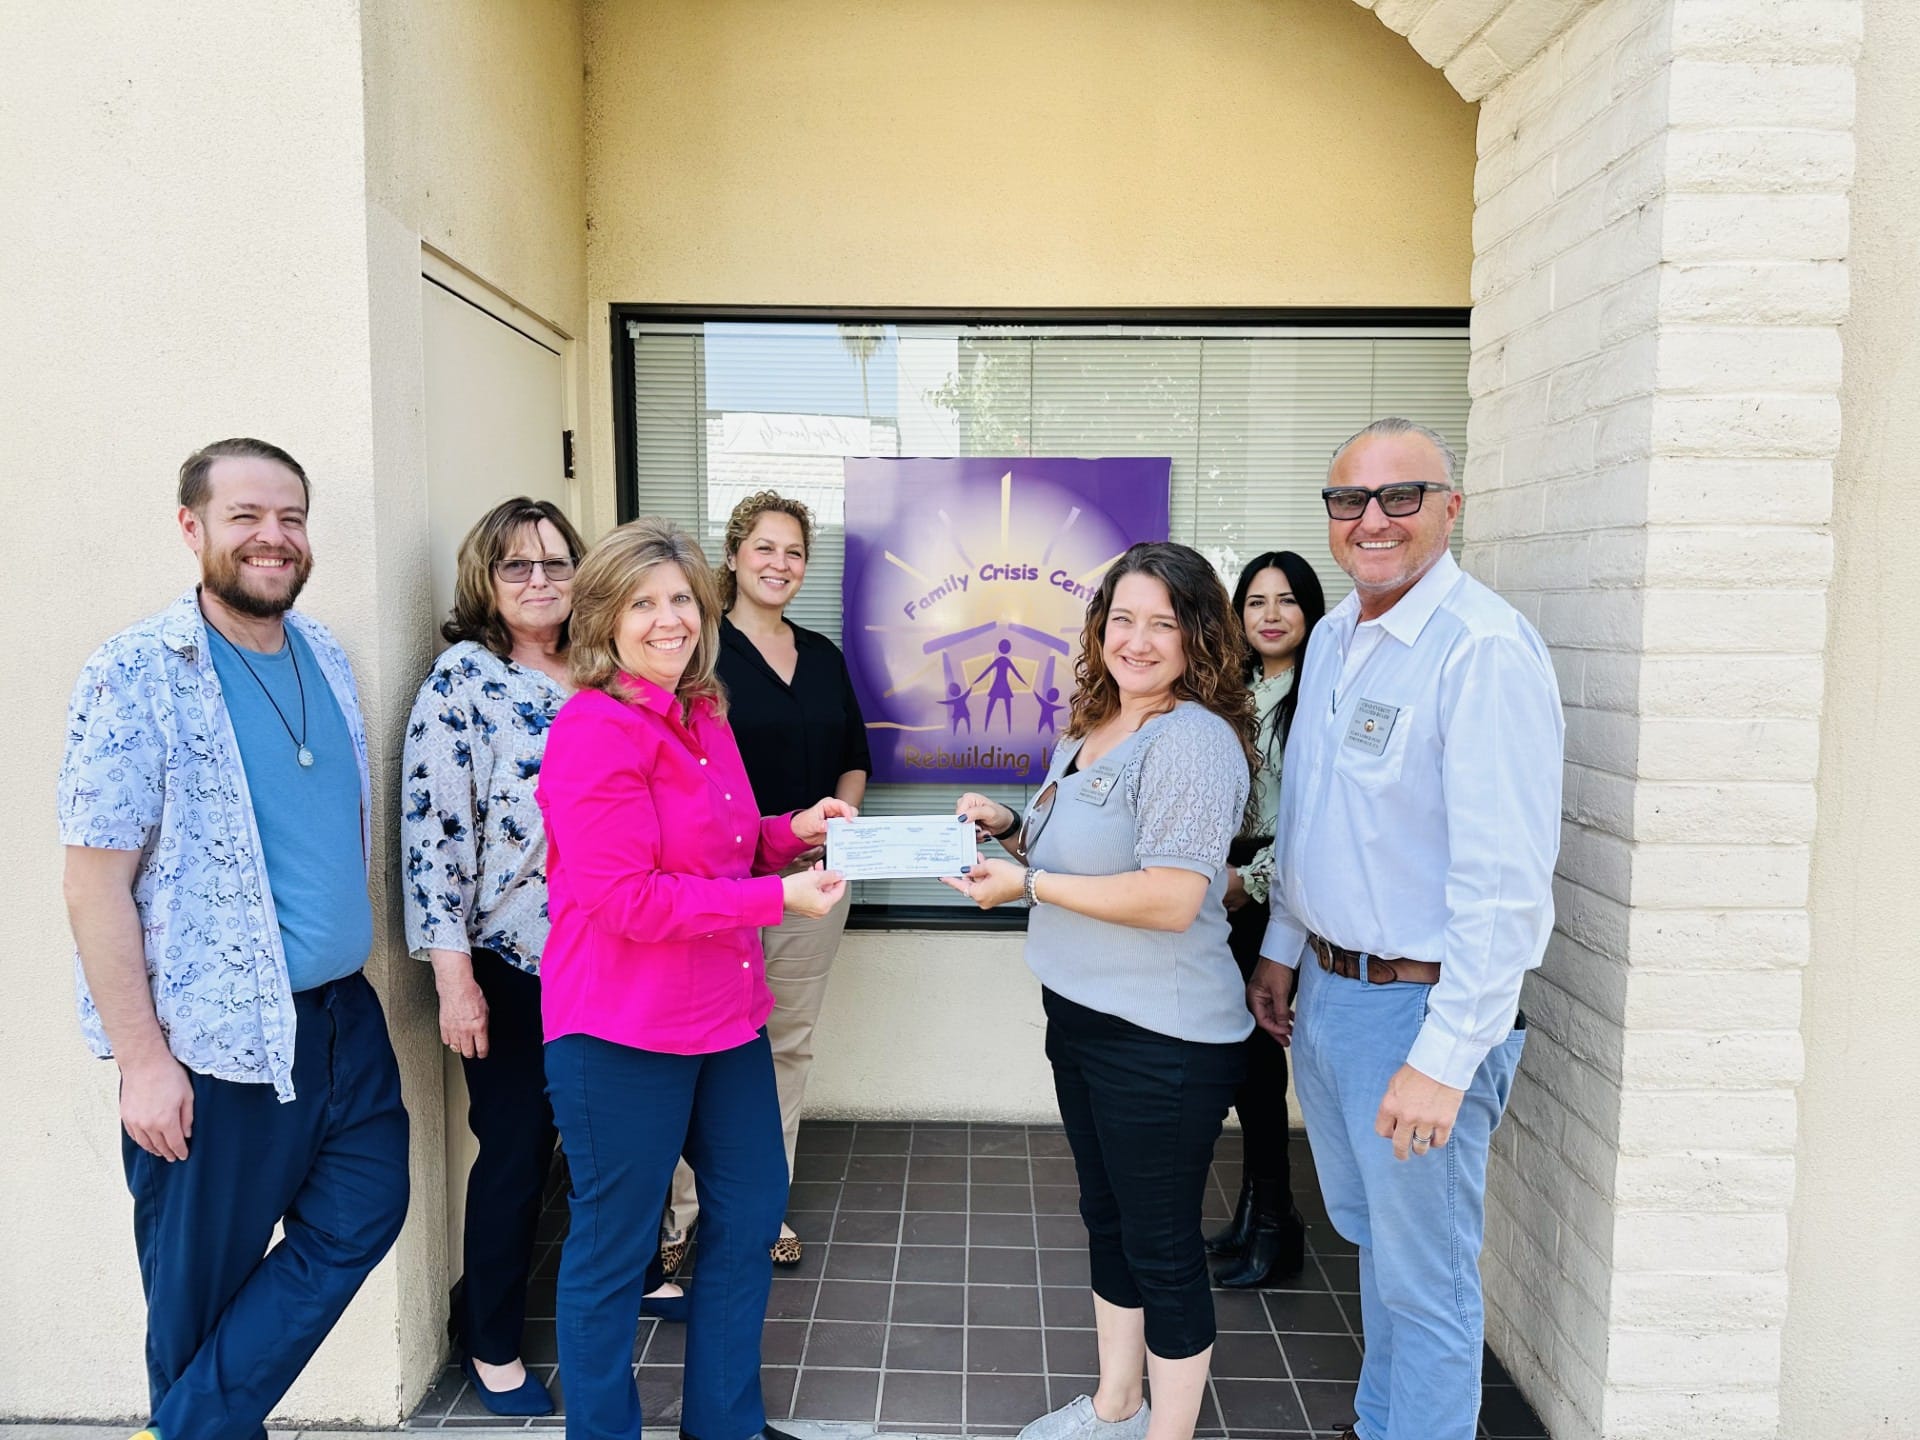 Porterville $2500 Gratitude Grant 2023/2024 recipient Central CA Family Crisis Center. Presented to Mary Culvert and staff by Porterville Elks #1342 President Chad Everett and Vice President Kim Silva.